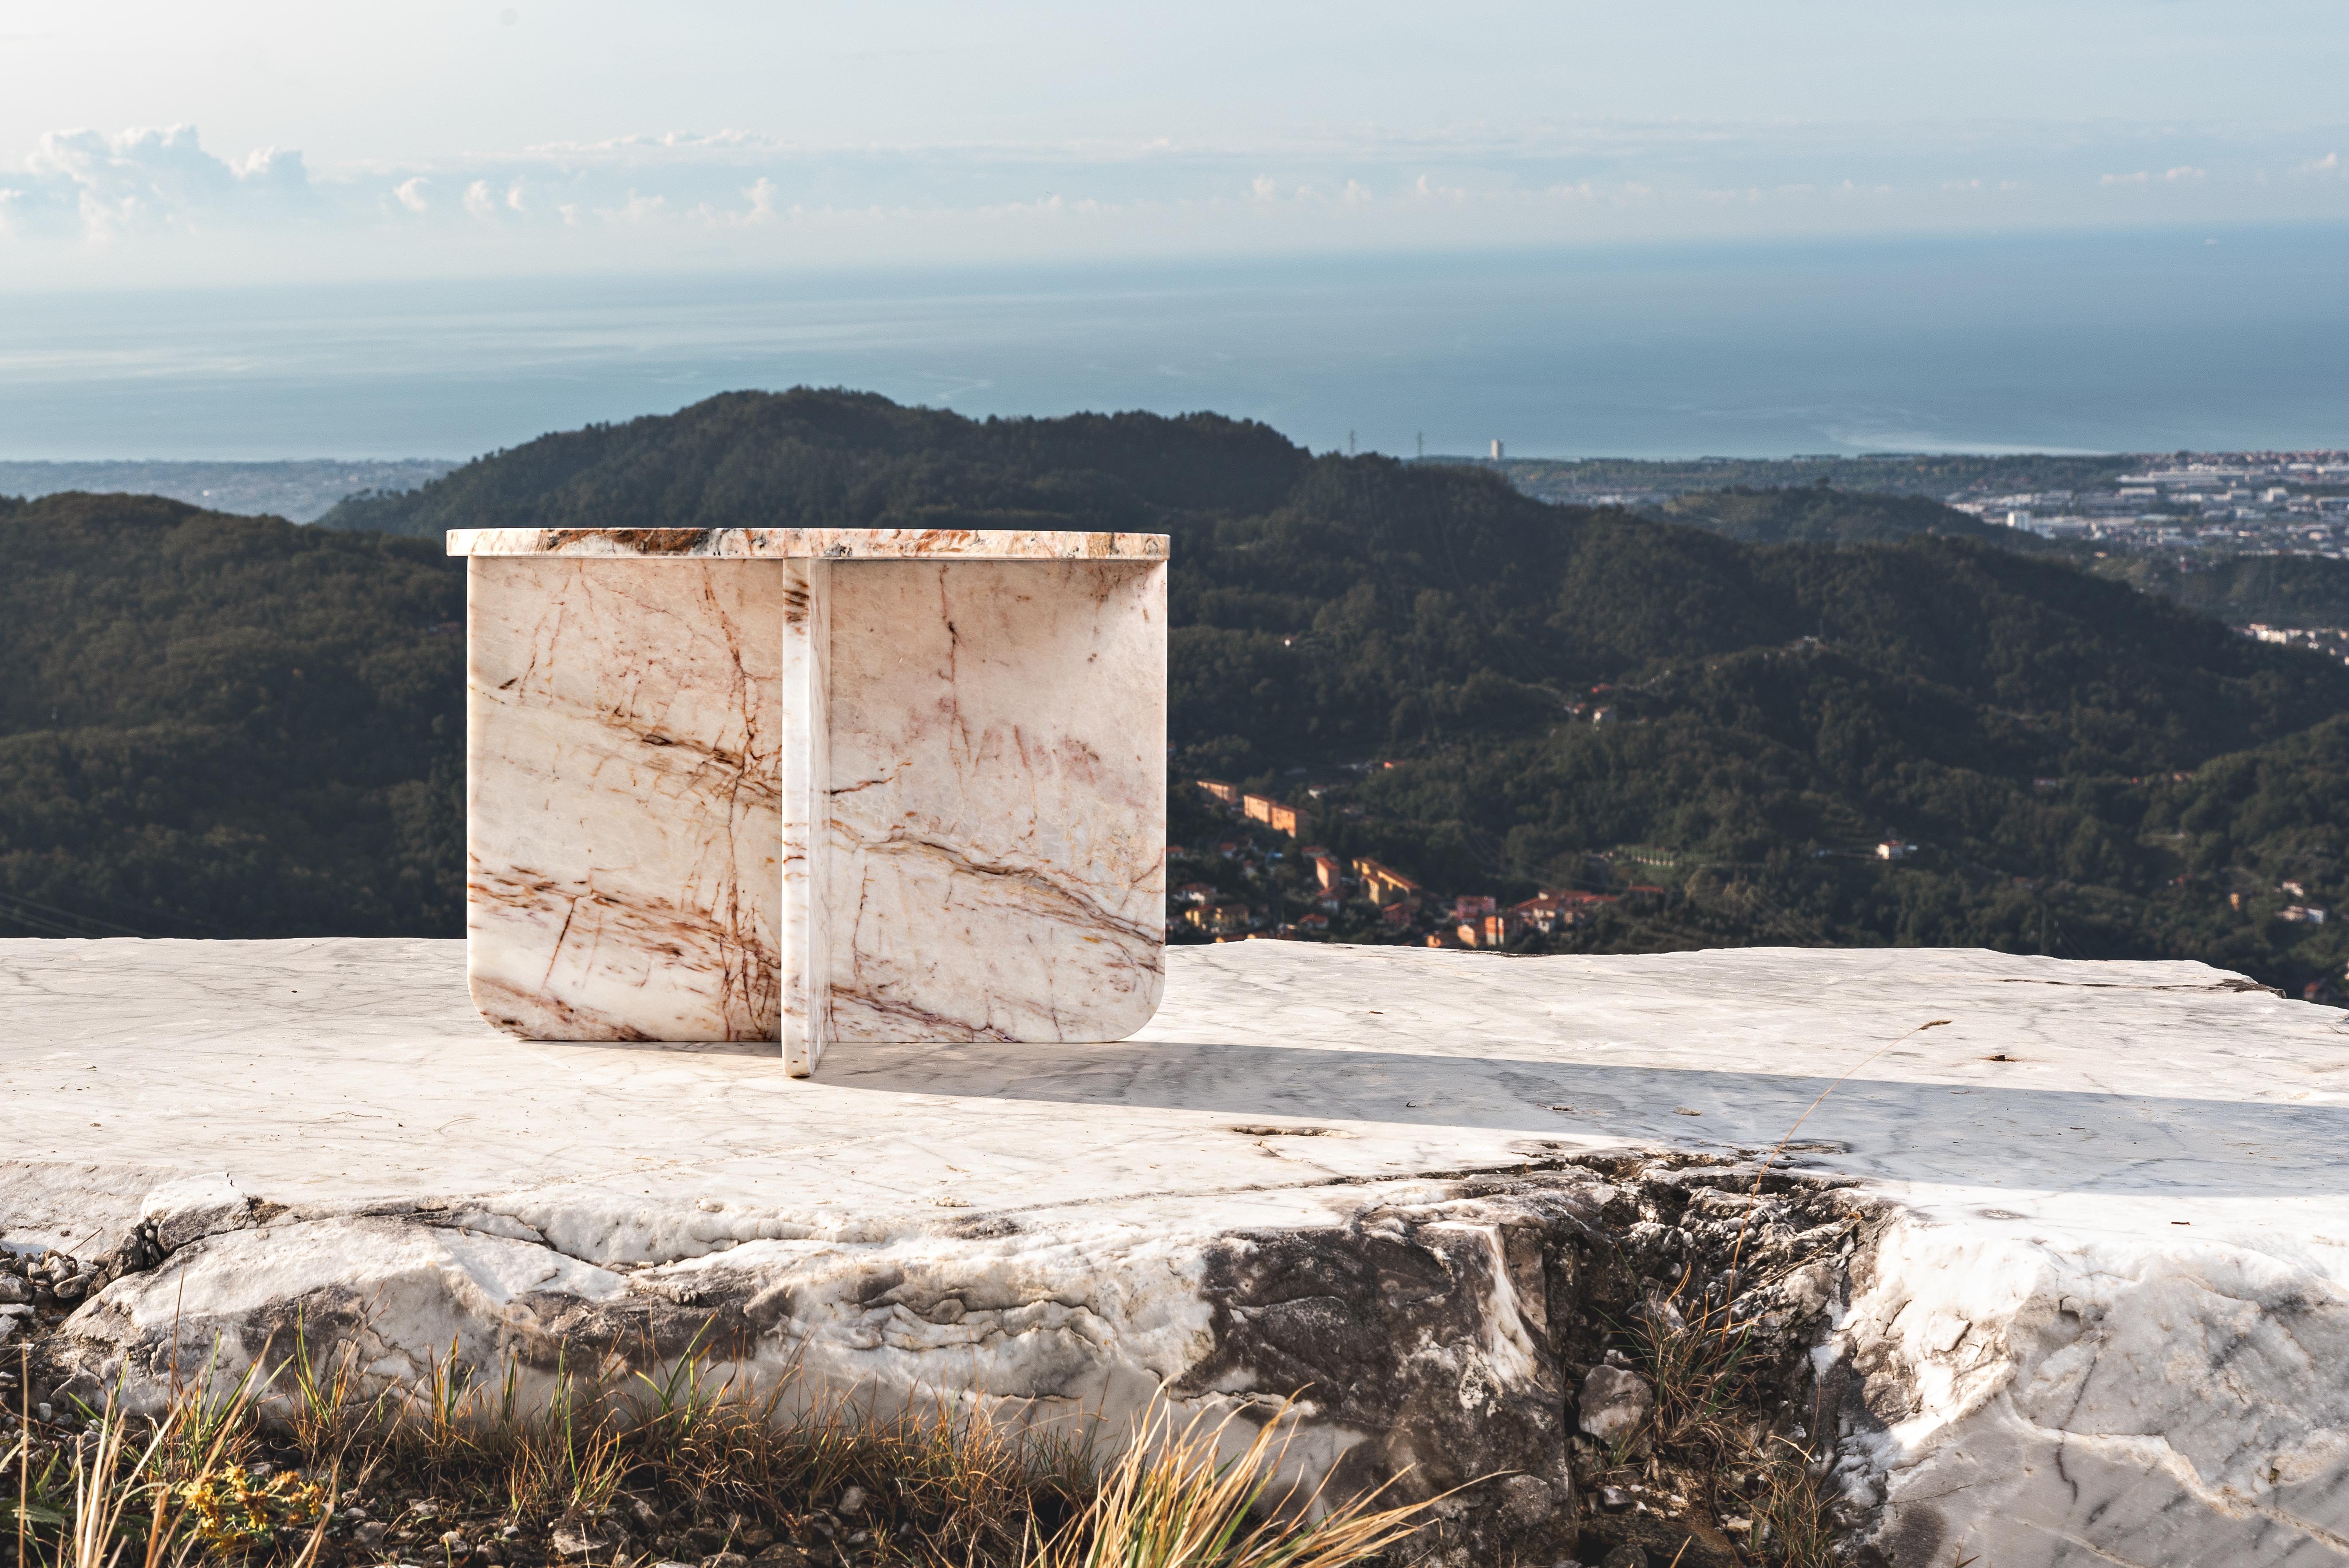 Mara Marble Side Table by Edition Club
Edition 6 of 6
Dimensions: L 55 x W 37 x H 40 cm
Materials: Tarahumara marble from Latin America

Edition/Club is born from an environmental consciousness of reducing waste generated from the stone industries.